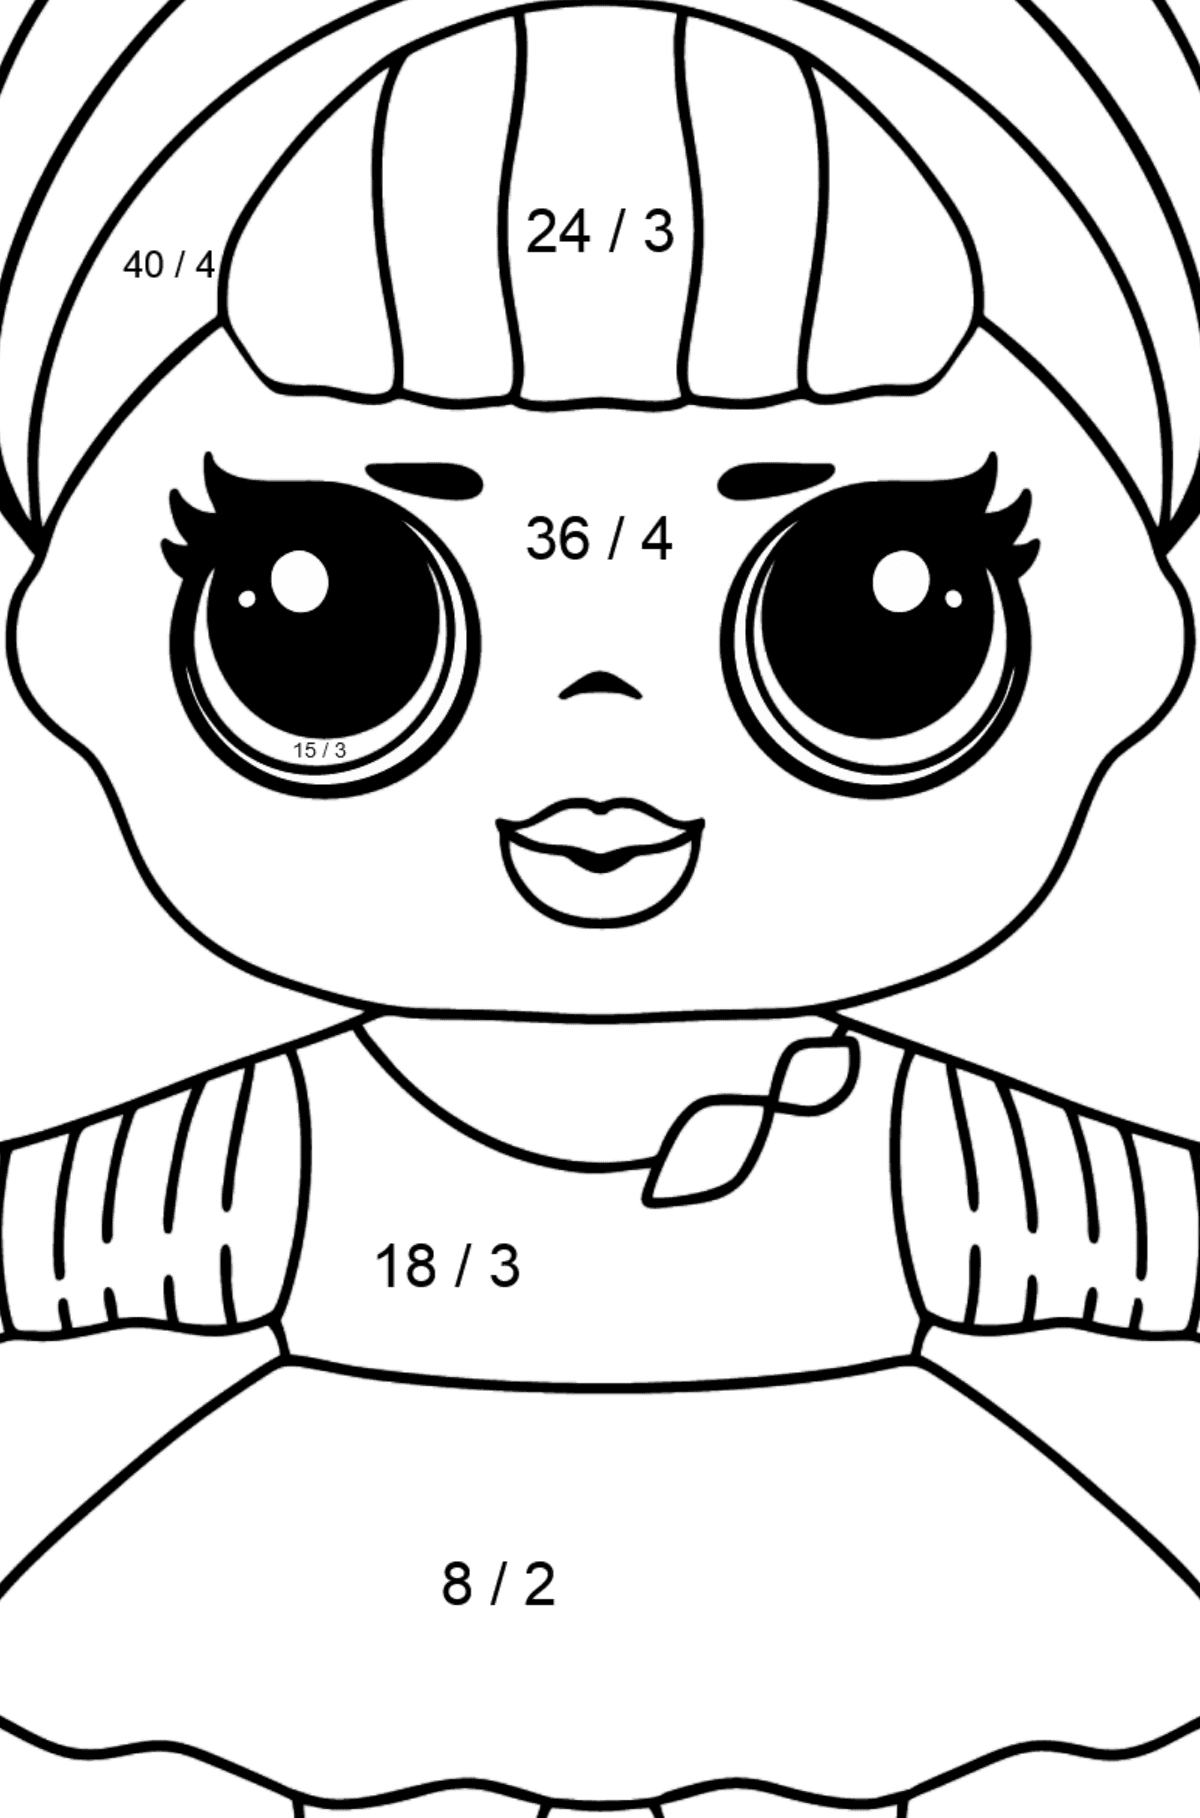 LOL Surprise Doll Sis Swing Coloring page - Math Coloring - Division for Kids